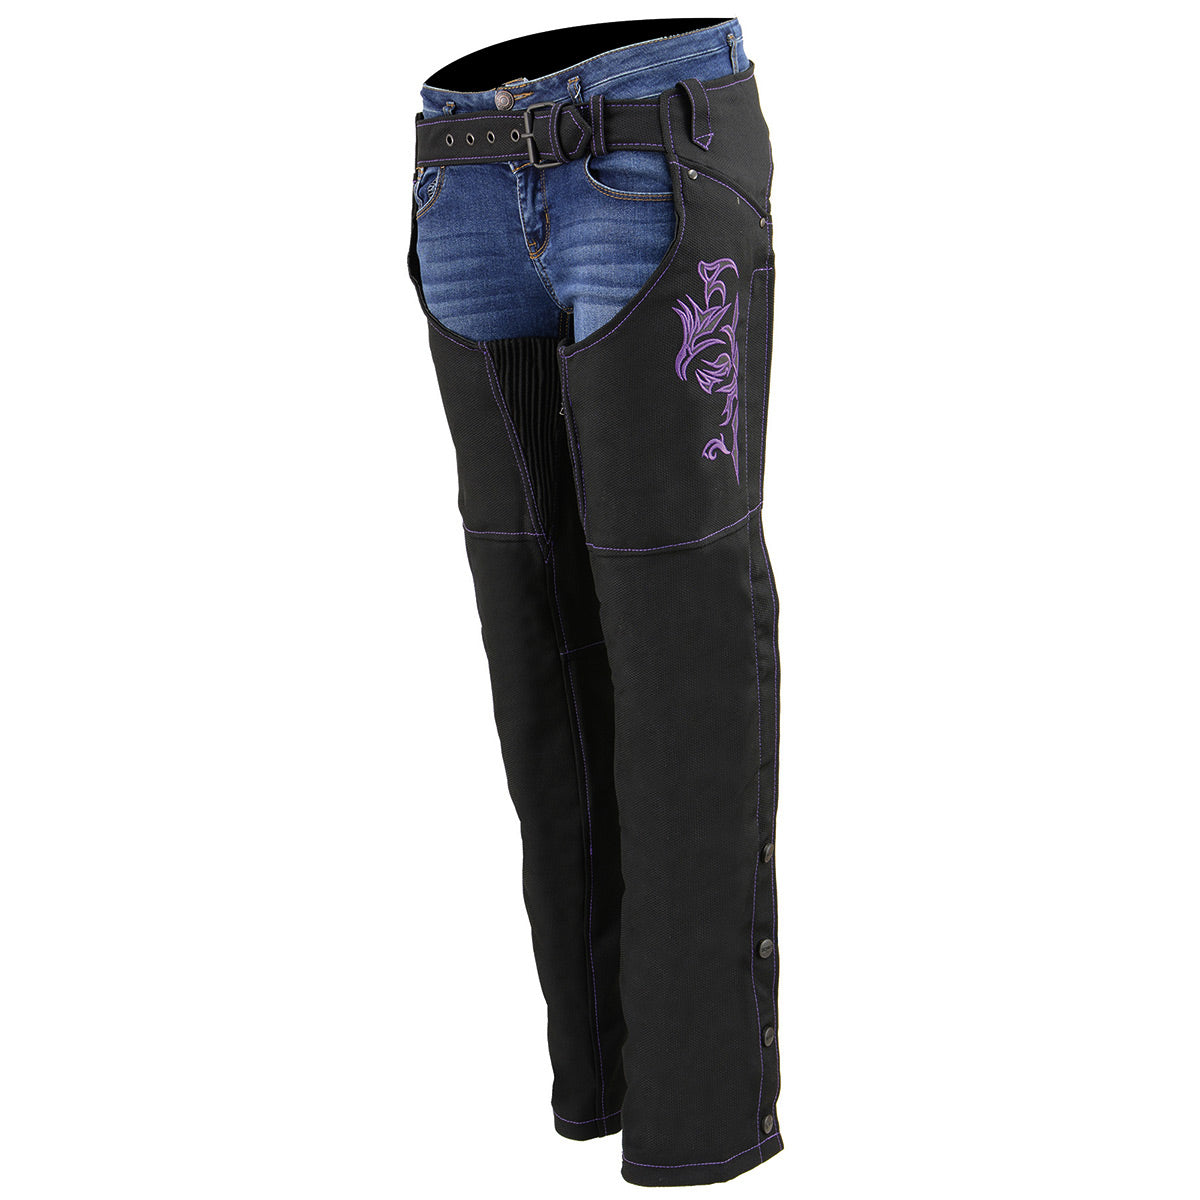 Milwaukee Leather SH1182 Women's Black with Purple Textile Motorcycle Riding Chaps with Tribal Embroidery